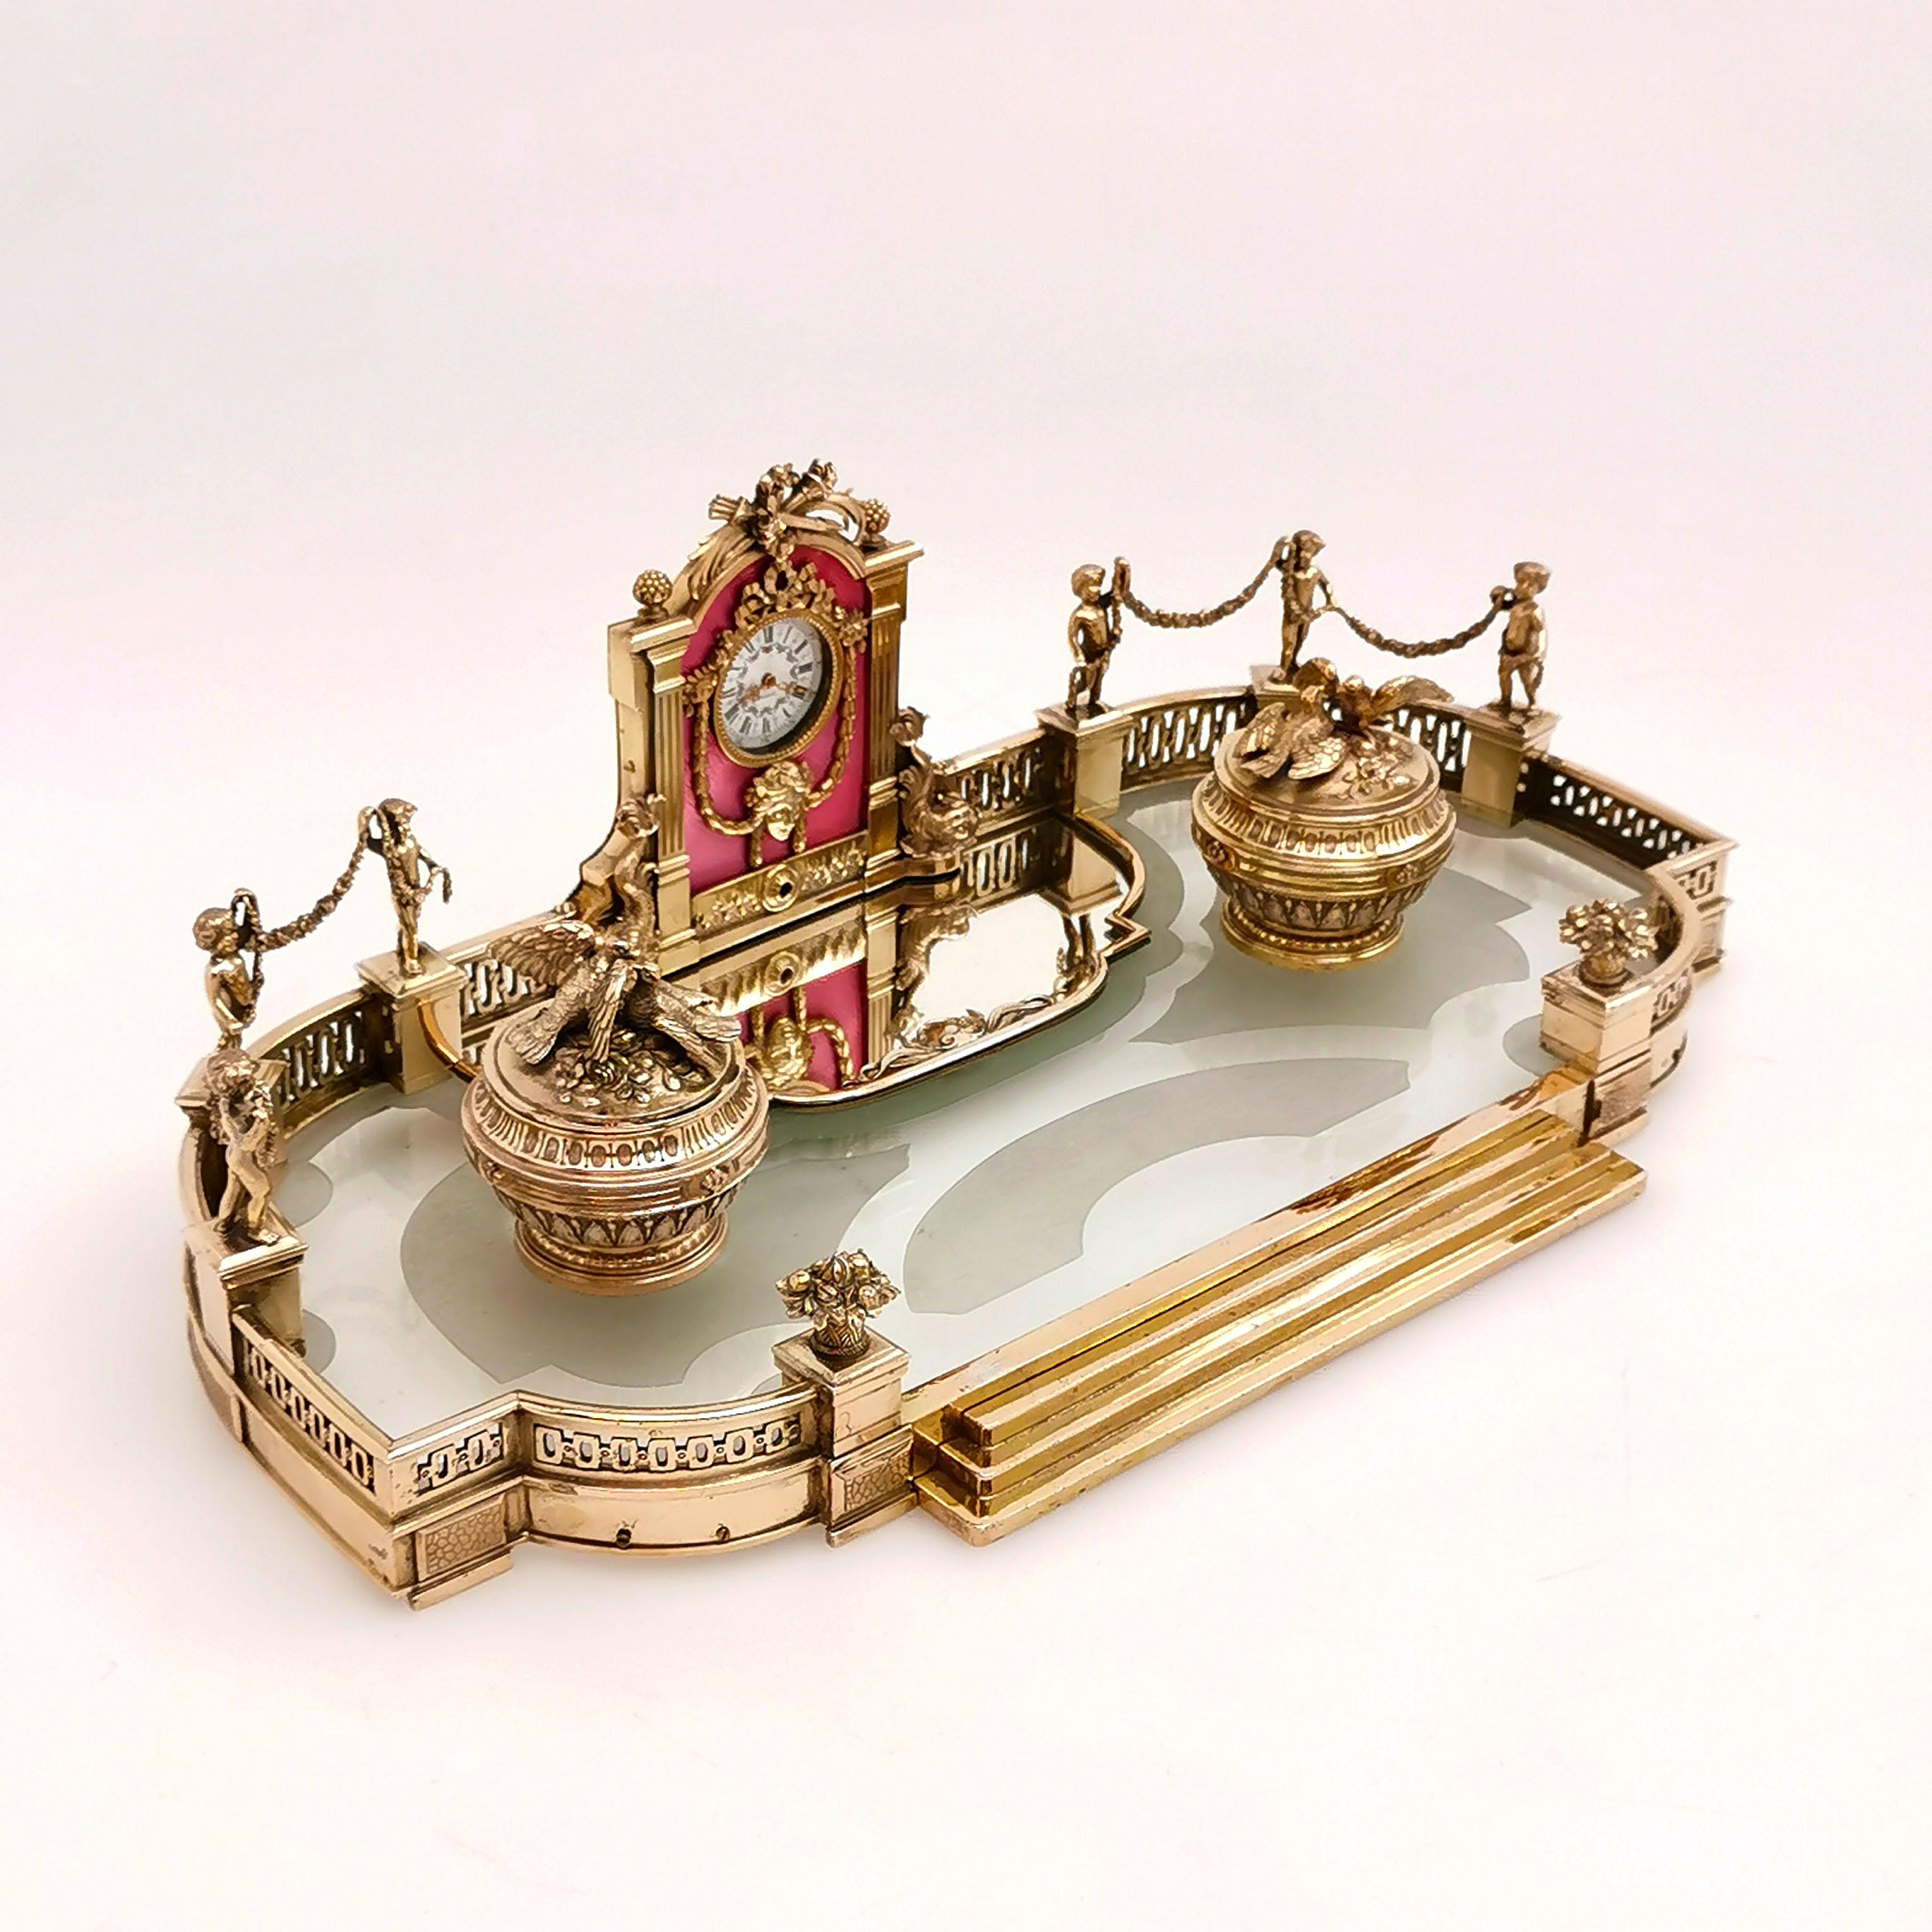 A magnificent antique French silver gilt mounted inkstand with a glass base. The inkstand is created to mirror a baroque or French formal garden, with the gilt & enamel clock in place of water feature. The Clock has a mirror below it and is